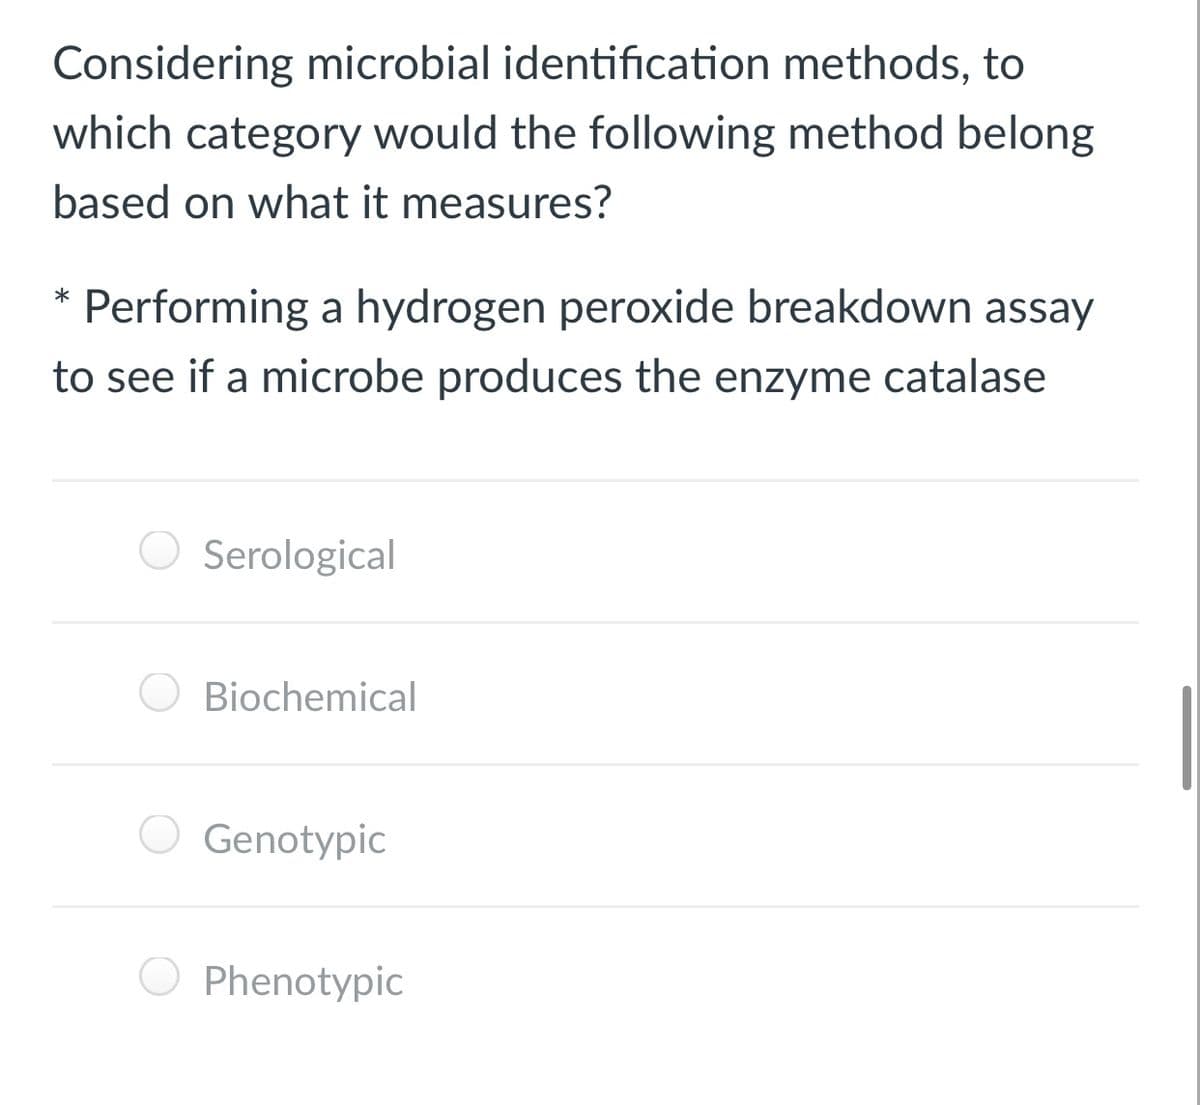 Considering microbial identification methods, to
which category would the following method belong
based on what it measures?
* Performing a hydrogen peroxide breakdown assay
to see if a microbe produces the enzyme catalase
Serological
O Biochemical
Genotypic
Phenotypic
